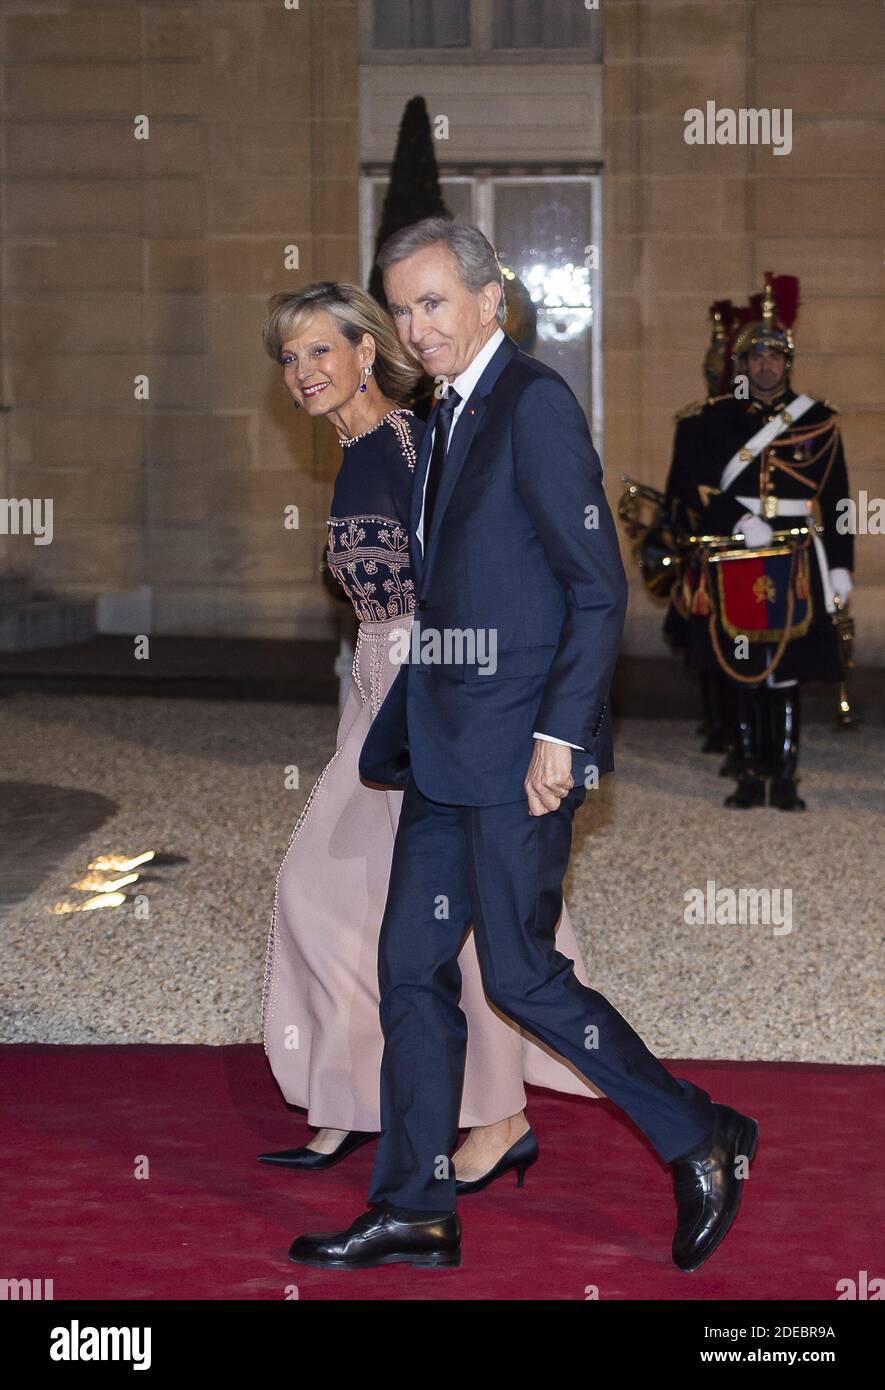 Bernard Arnault and Hélène Arnault arrives in the “Booksellers Area” of the  White House to attend a state dinner honoring France's President Emmanuel  Macron on April 24, 2018 in Washington, DC. Photo